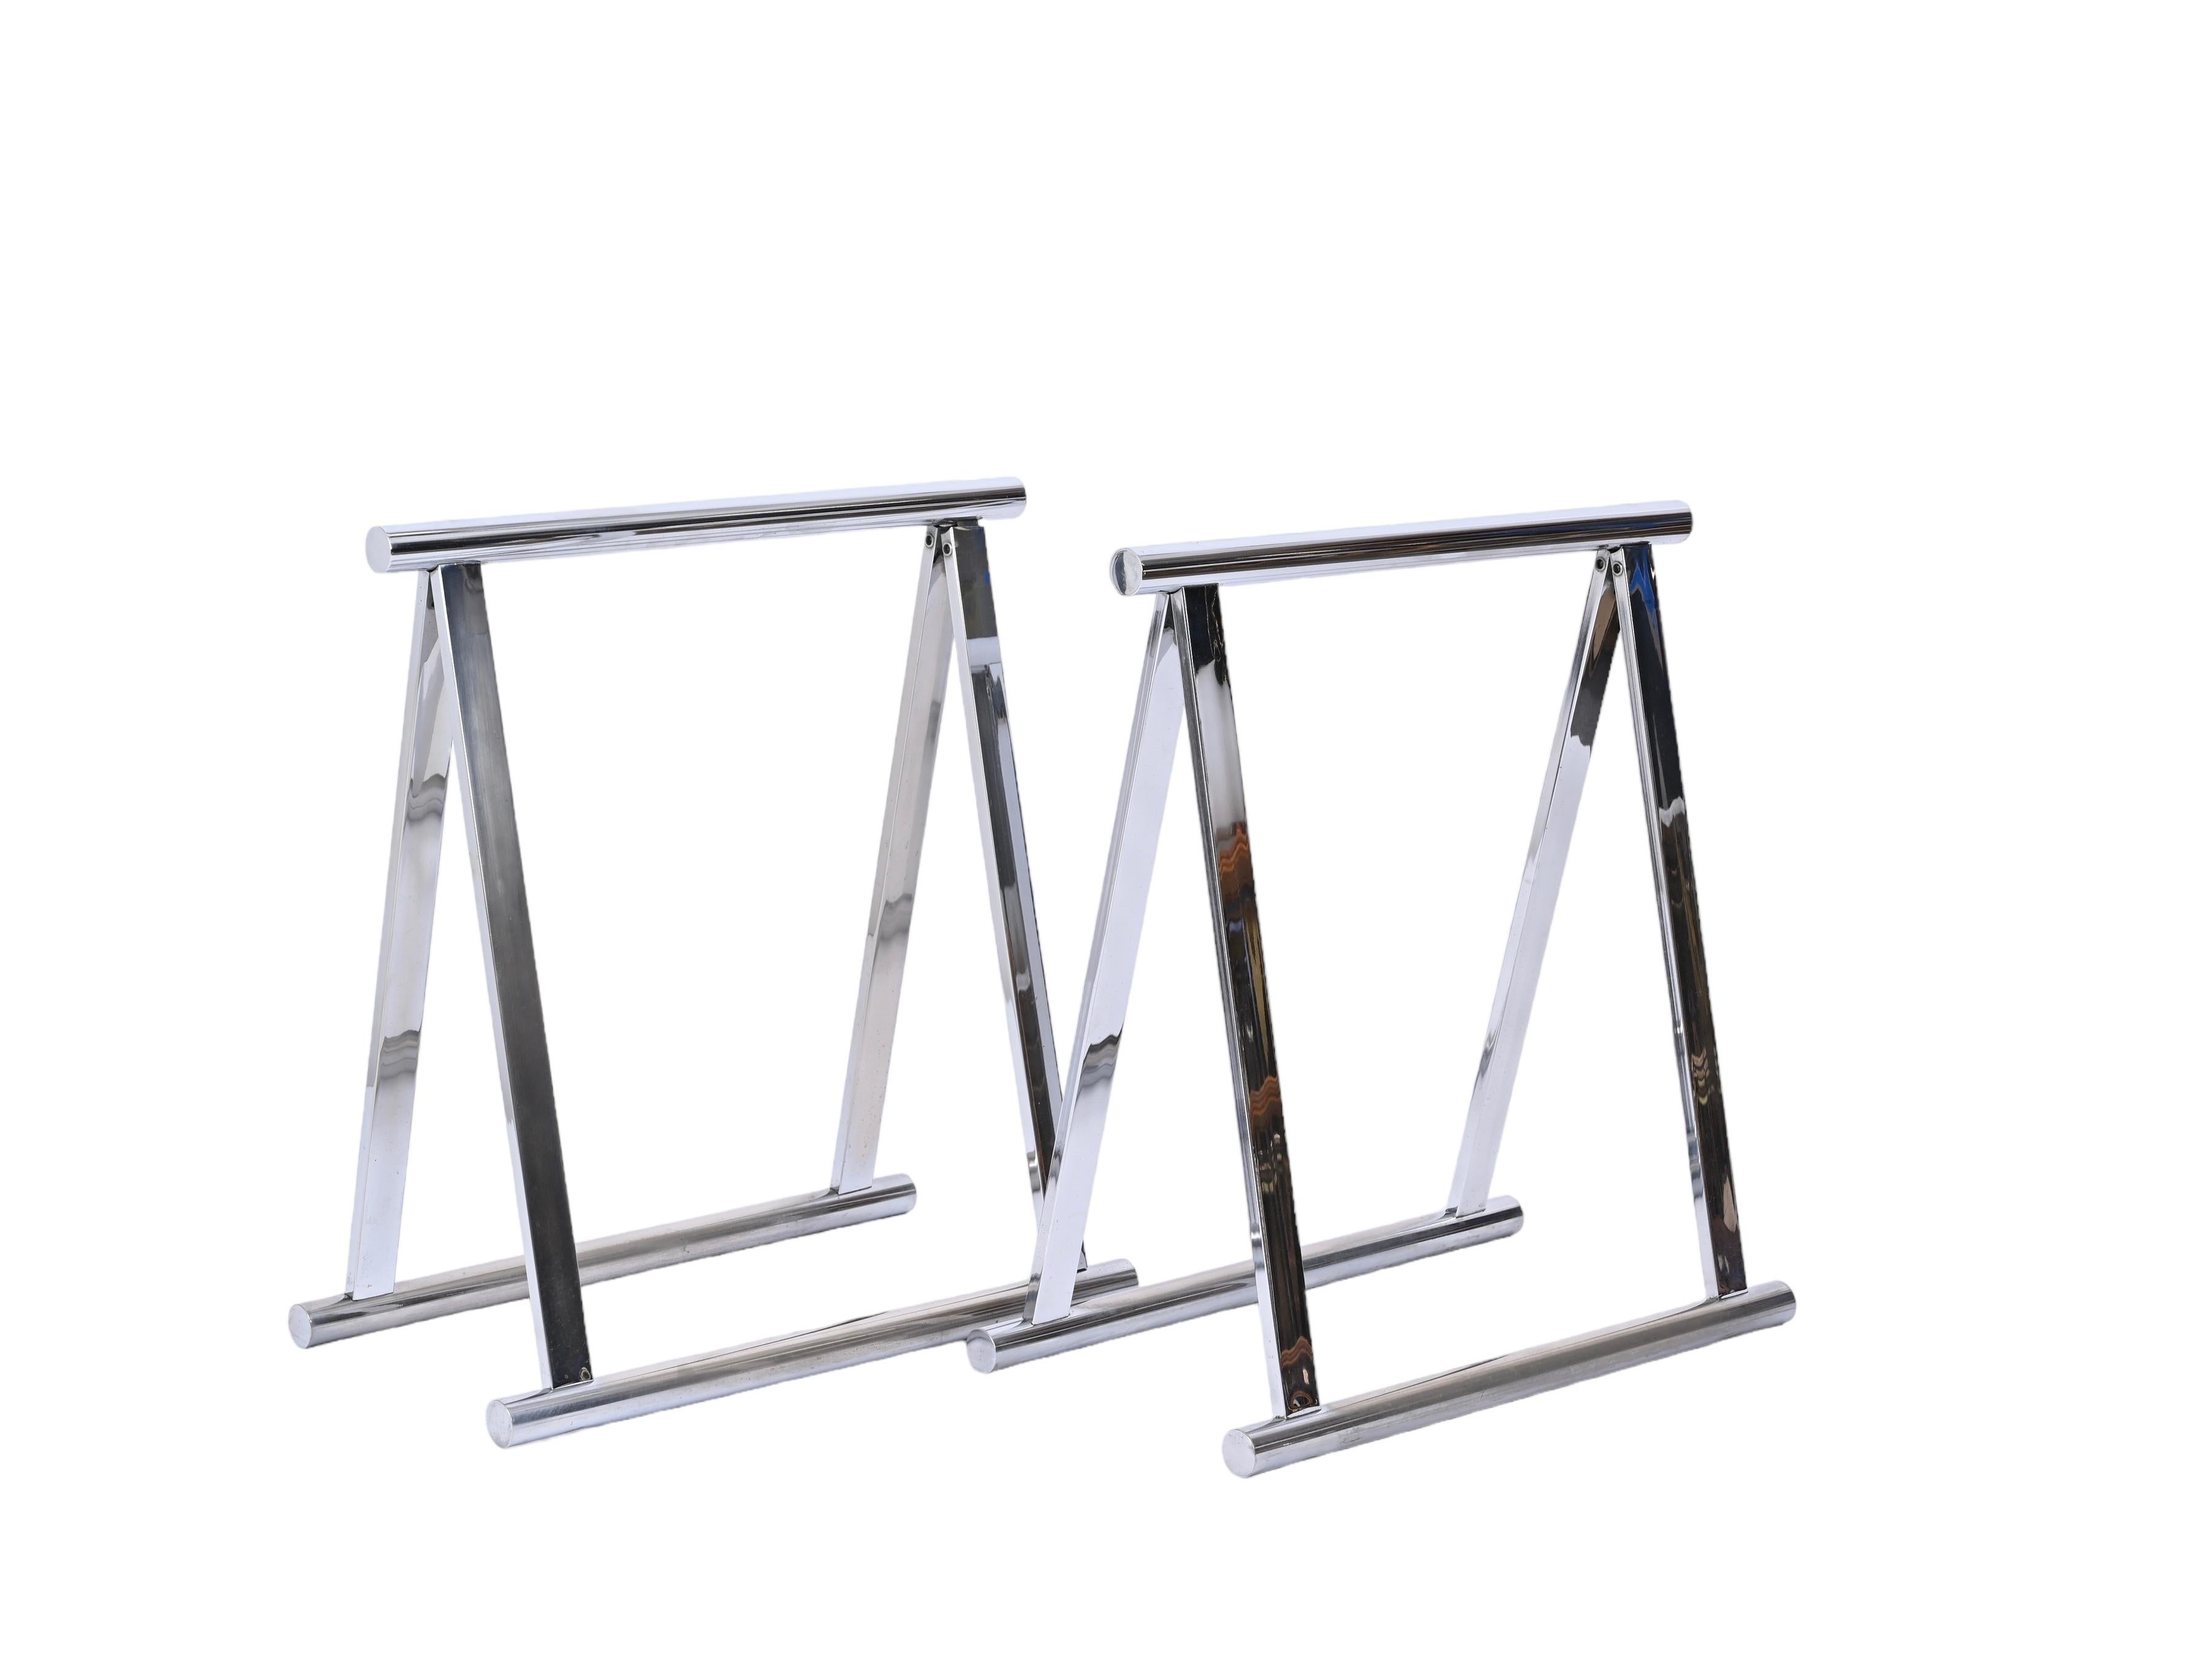 Pair of Midcentury Four-Legs Chromed Steel Italian Trestles After Baughman 1970s For Sale 2